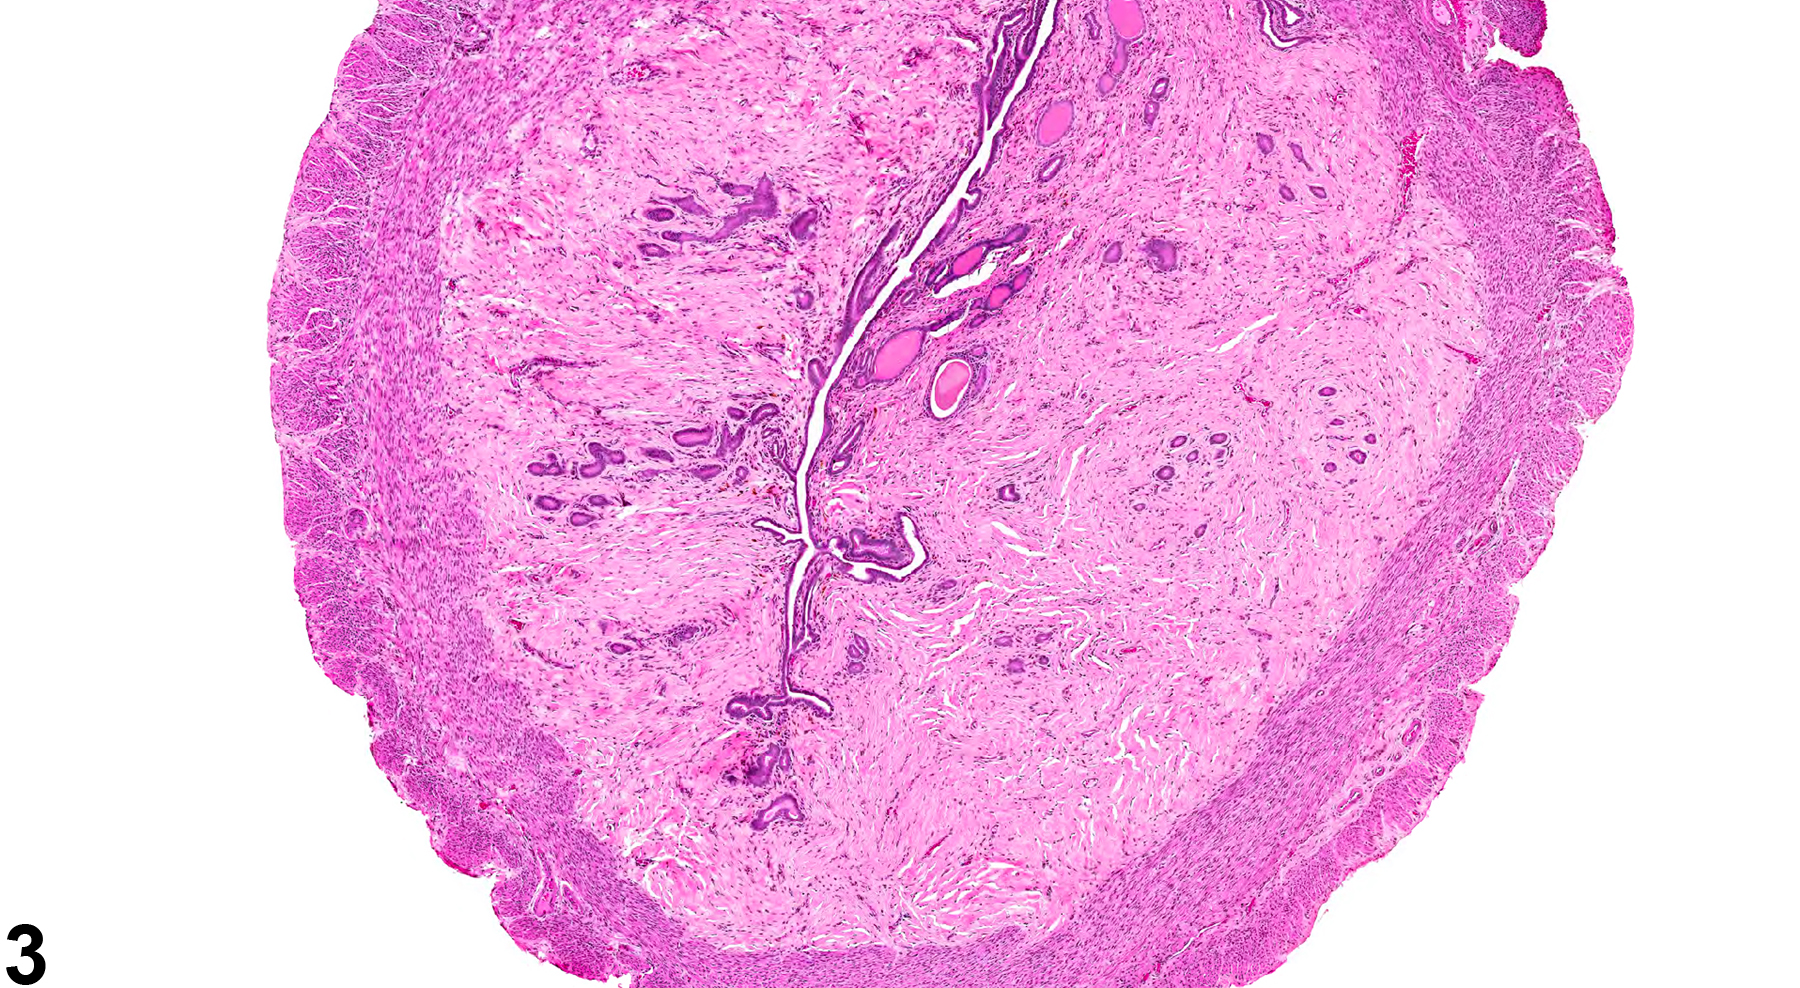 Image of fibrosis in the uterus from a female F344/N rat in a chronic study